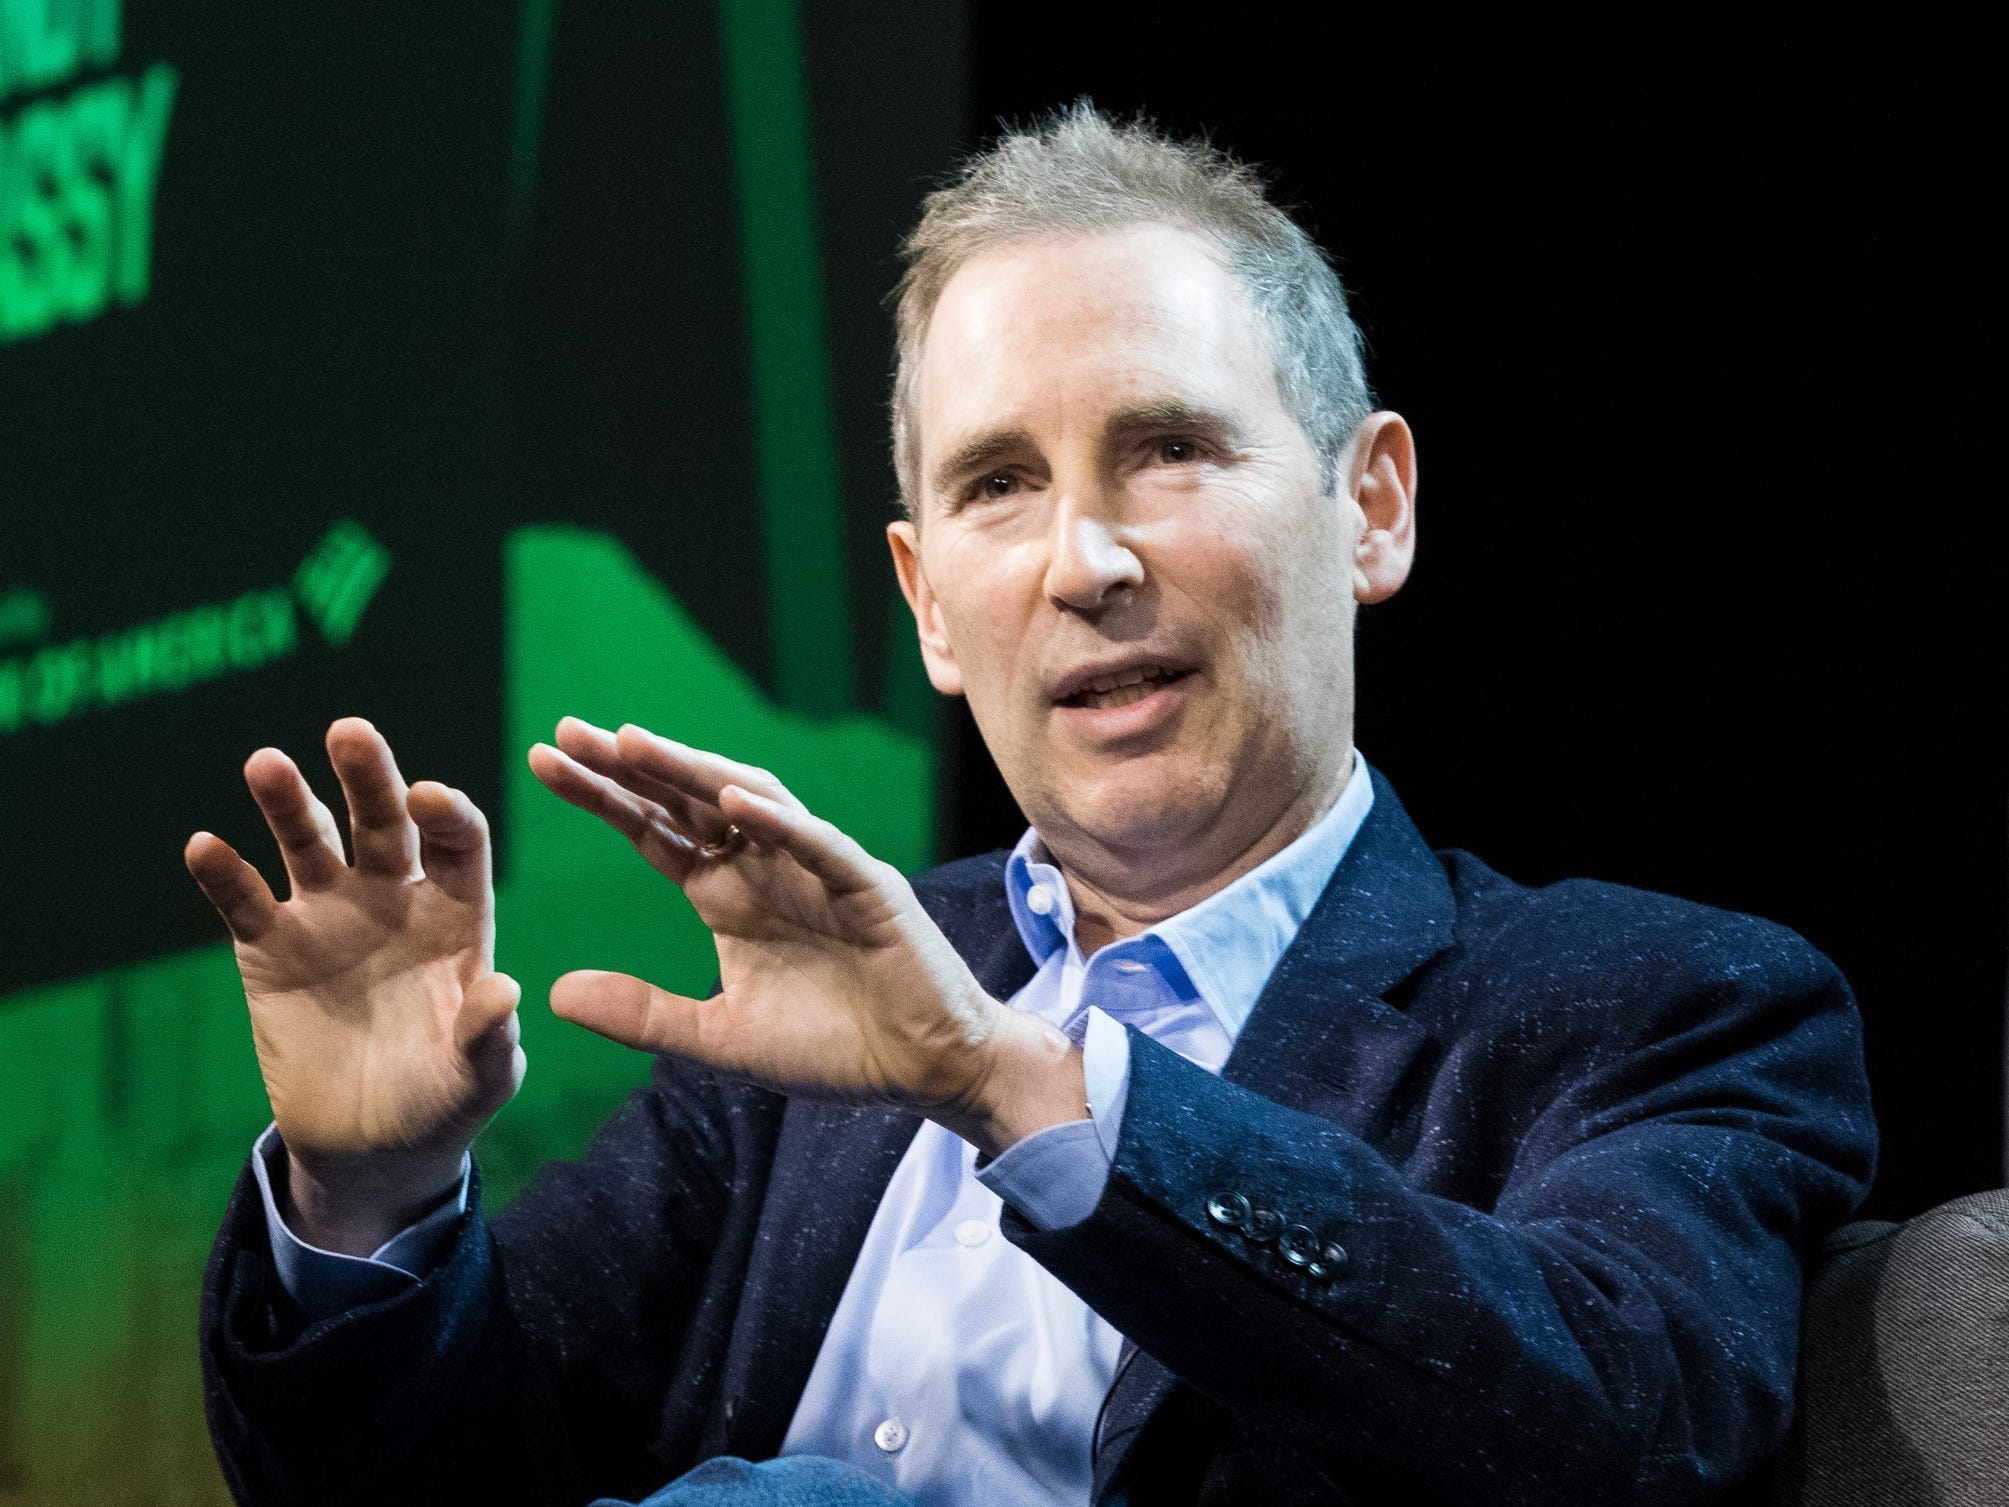 Amazon CEO Andy Jassy motions with his hands on stage at the GeekWire Summit.